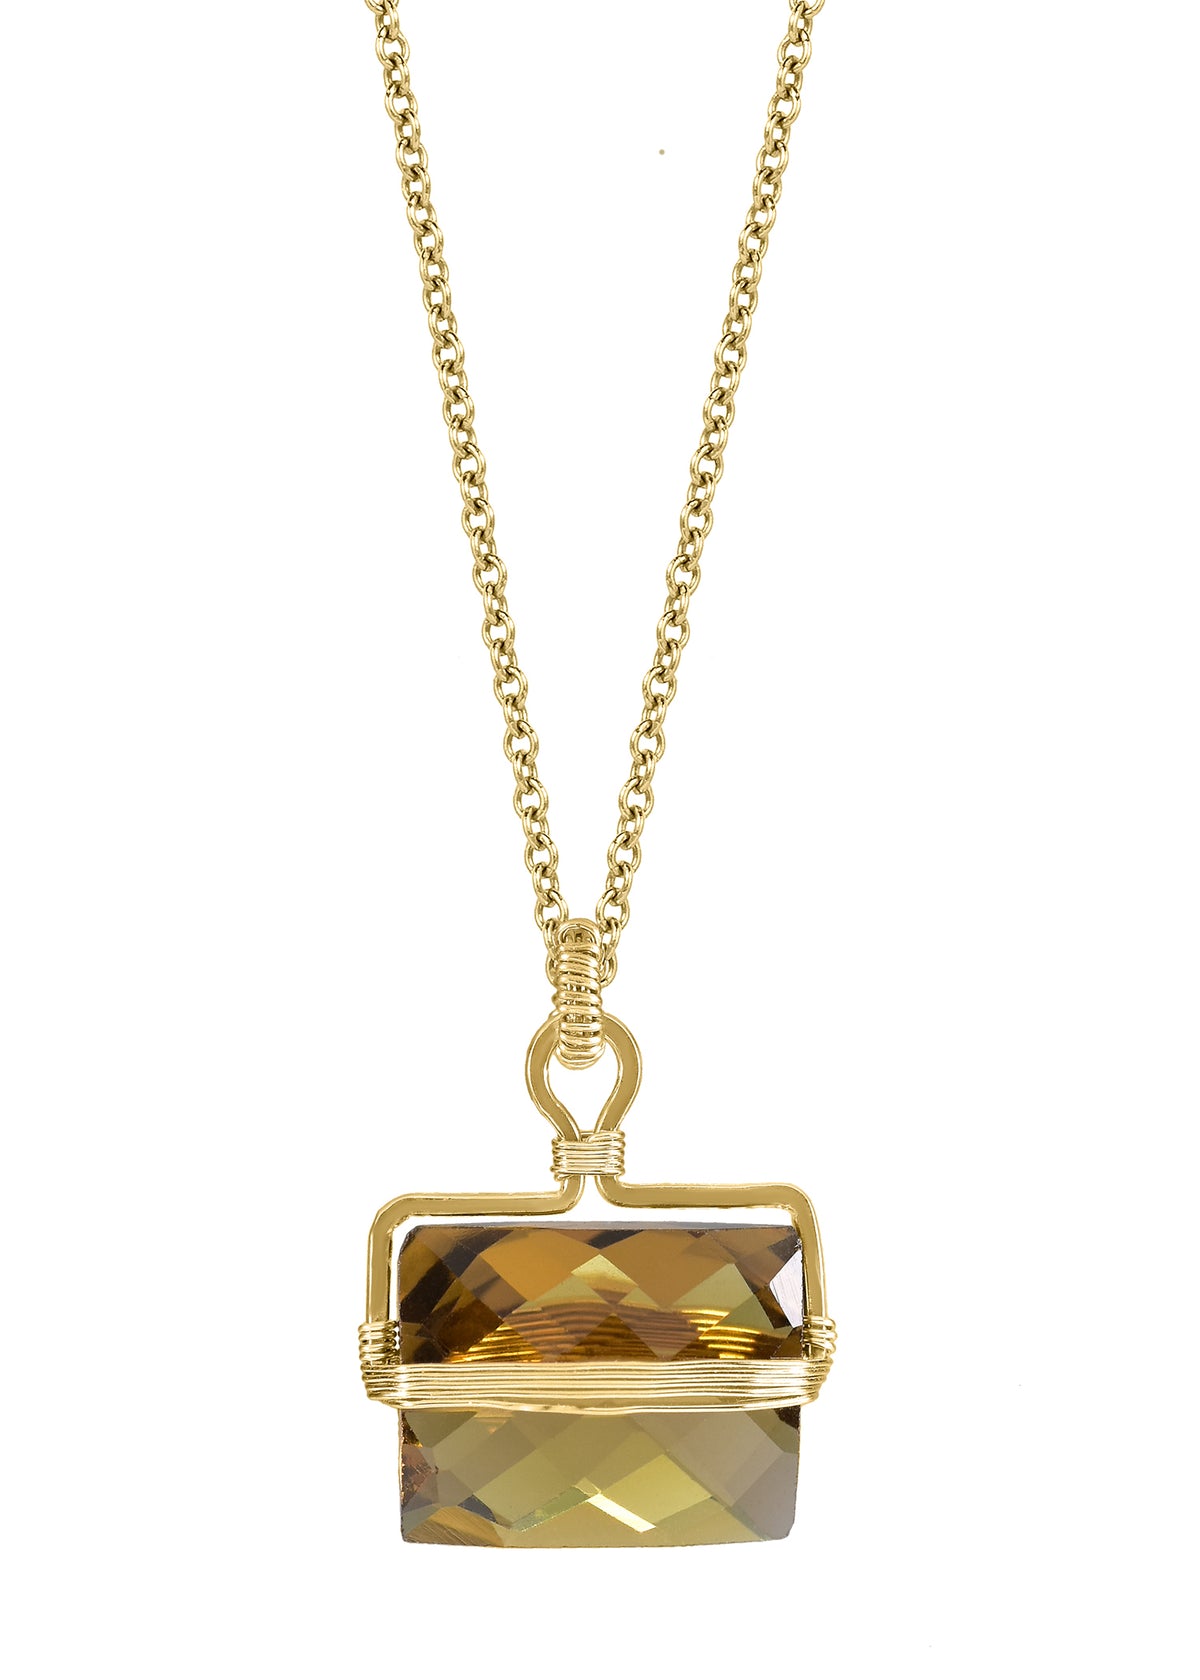 Whiskey quartz 14k gold fill Necklace measures 16&quot; in length Pendant measures 5/8&quot; in length and 9/16&quot; in width Handmade in our Los Angeles studio